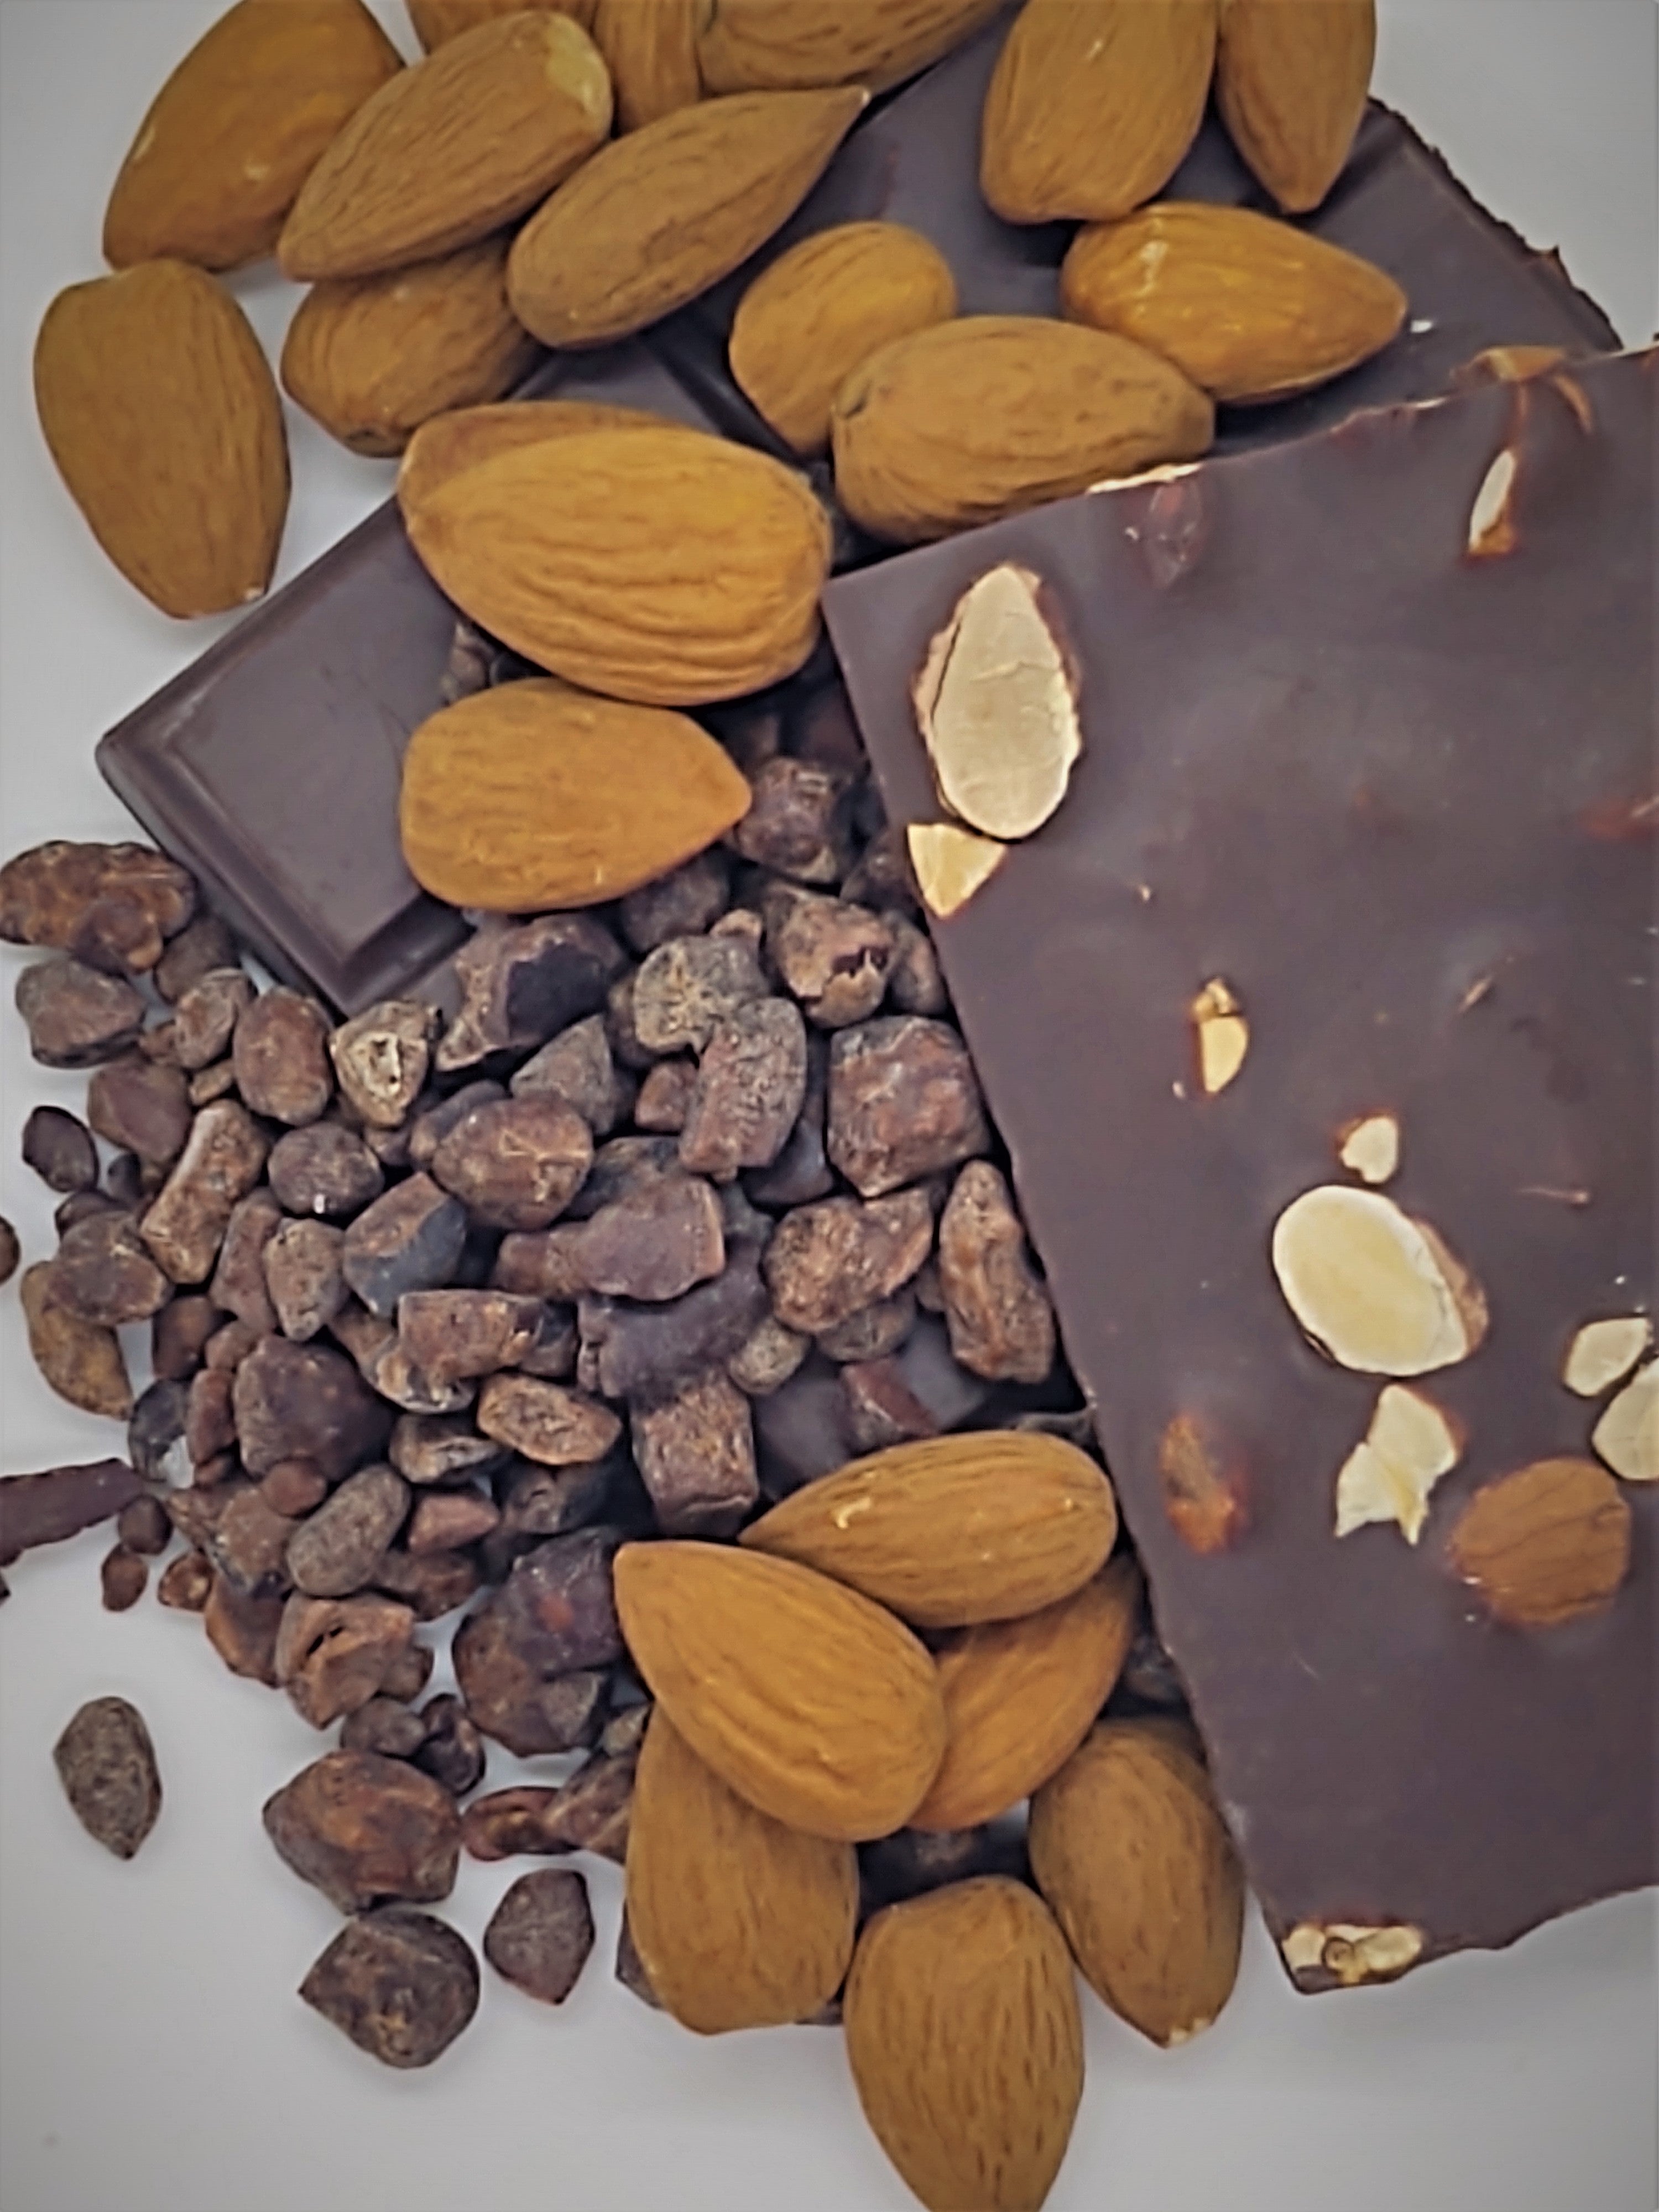 Pictured: solid dark chocolate bar with almonds. The bar is mounted by cocoa nibs and whole, roasted almonds